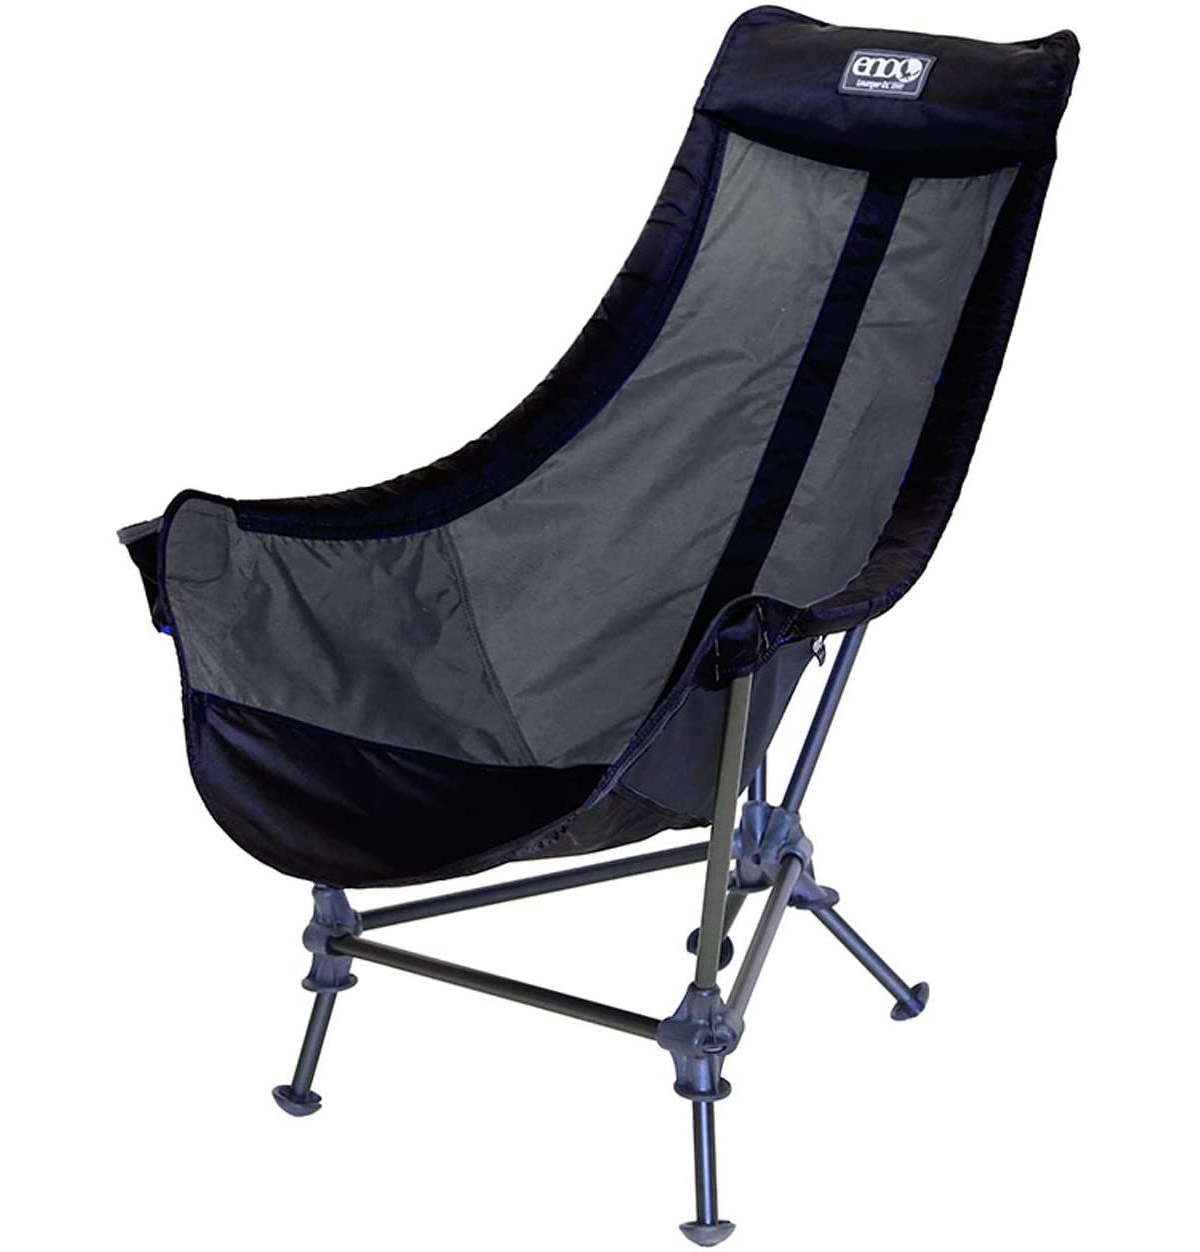 Lounger Dl Chair - Portable Outdoor Hiking, Backpacking, Beach, Camping, and Festival Chair - Black/Charcoal - Black/Charcoal